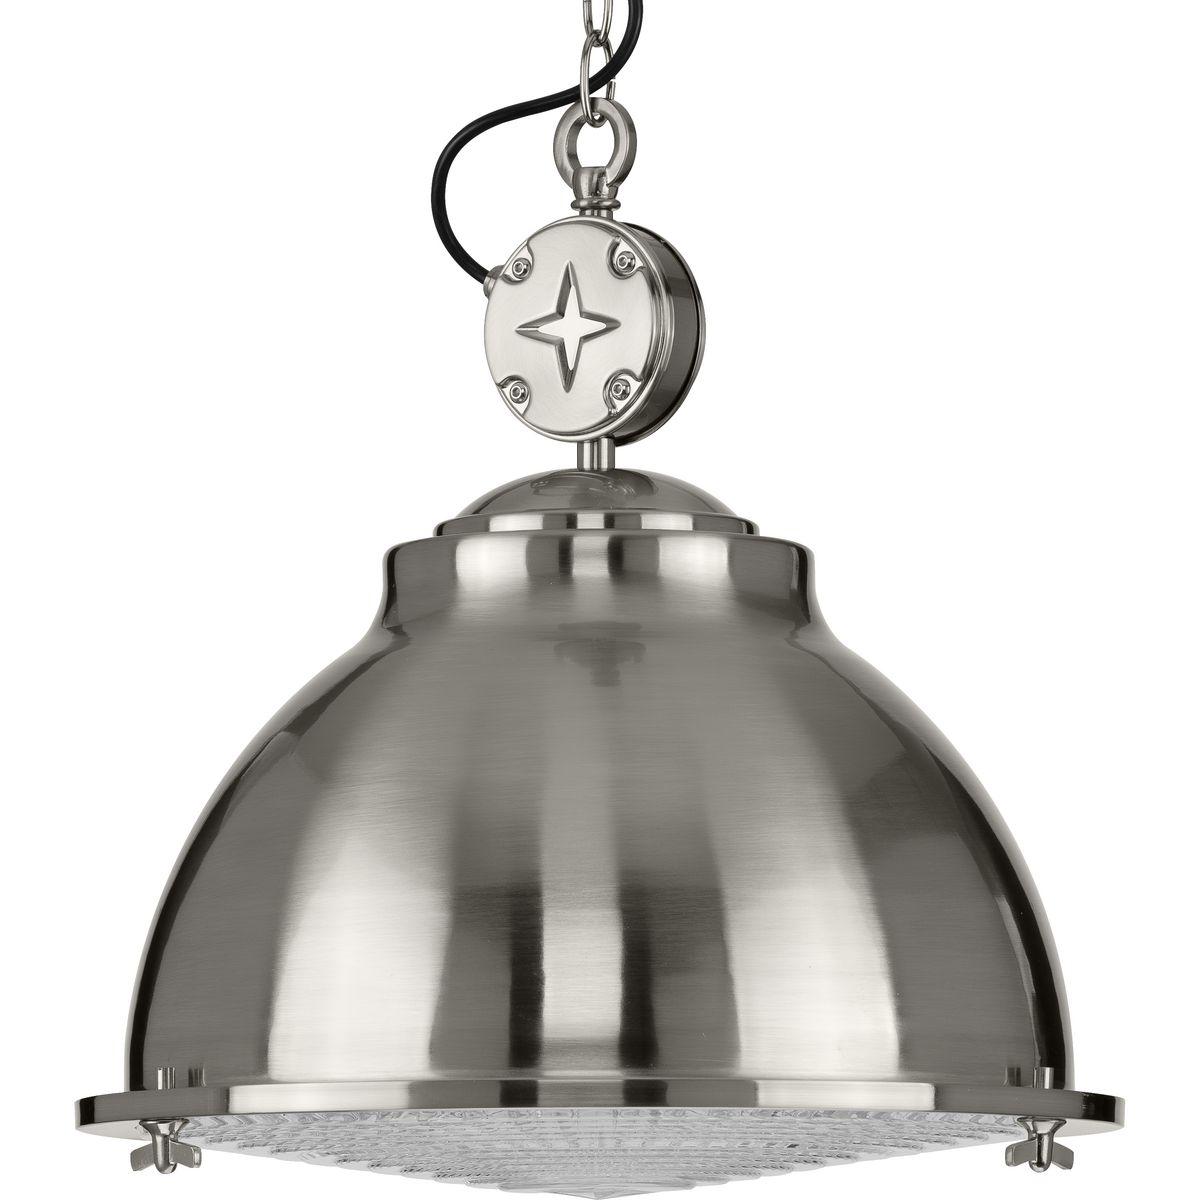 Hubbell P500212-009 Inspired by vintage automobile engines, this pendant boasts a signature star motif for added industrial character. The smooth metal shade is coated in a beautiful brushed nickel finish. The shade holds a prismatic glass diffuser primed for providing optim